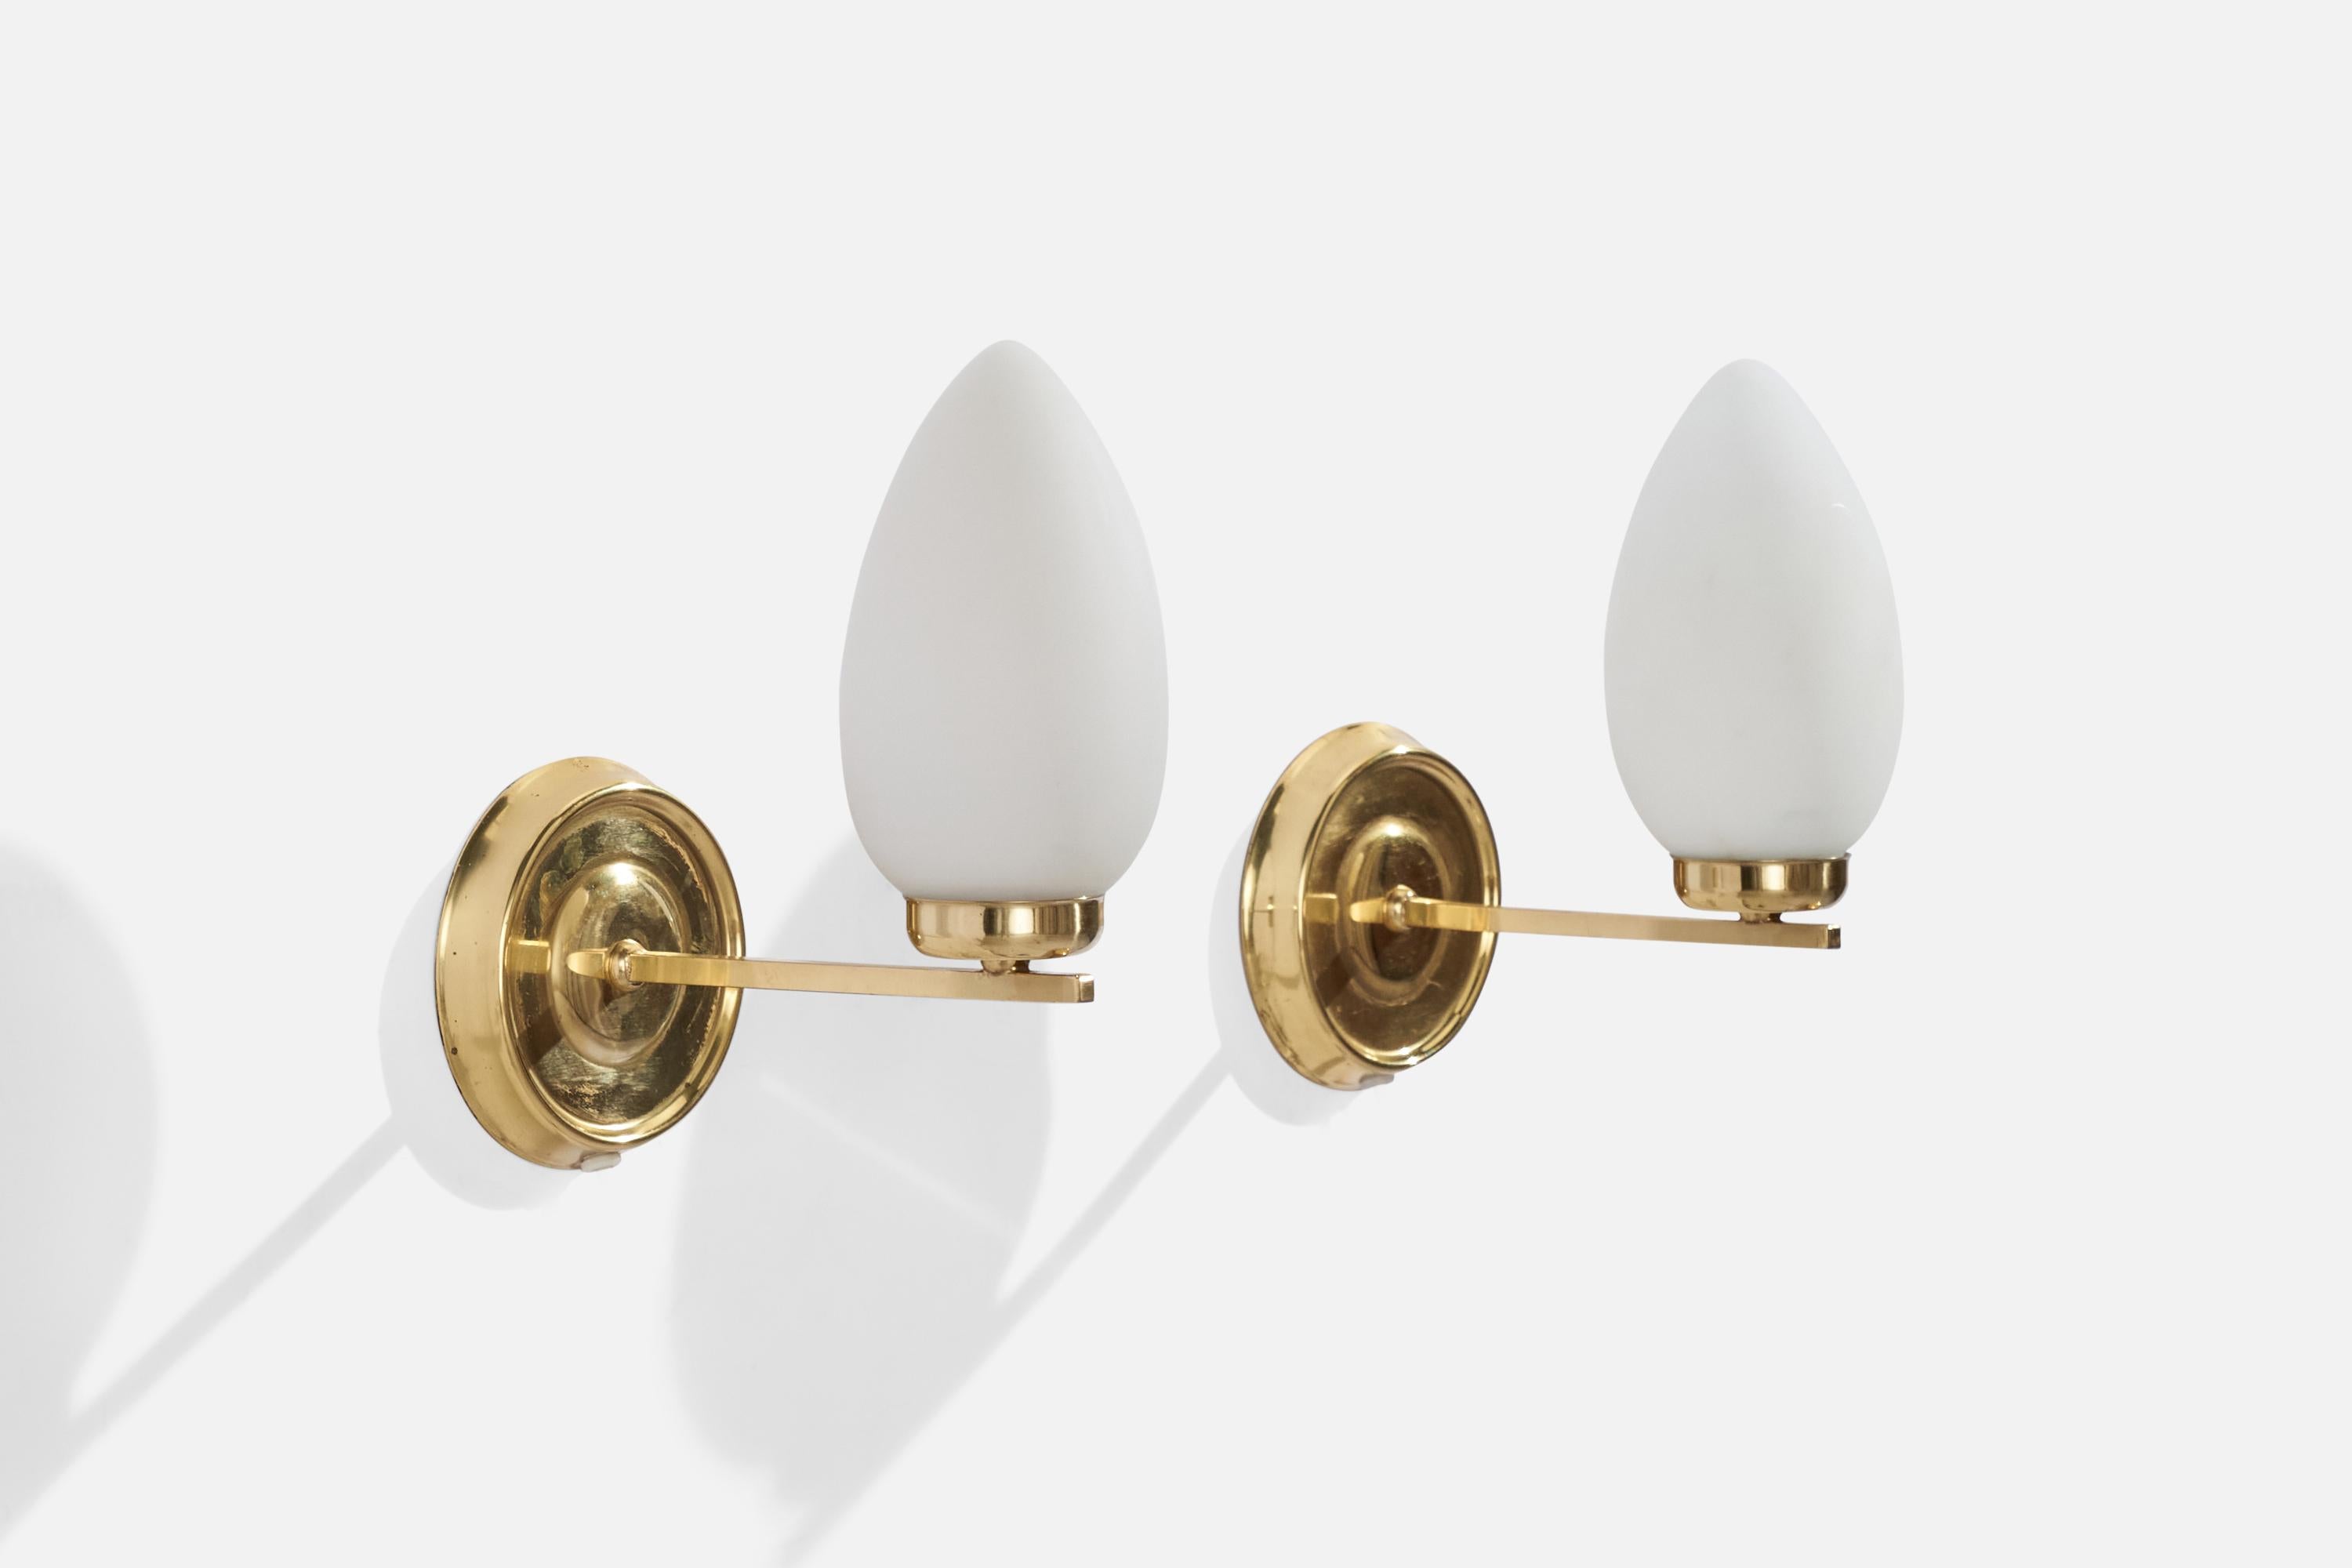 A pair of brass and opaline glass wall lights designed and produced in Sweden, c. 1970s.

Overall Dimensions (inches): 7.5” H x 4.55” W x 8” D
Back Plate Dimensions (inches): 4.46” H x 1” D
Bulb Specifications: E-14 Bulb
Number of Sockets: 2
All